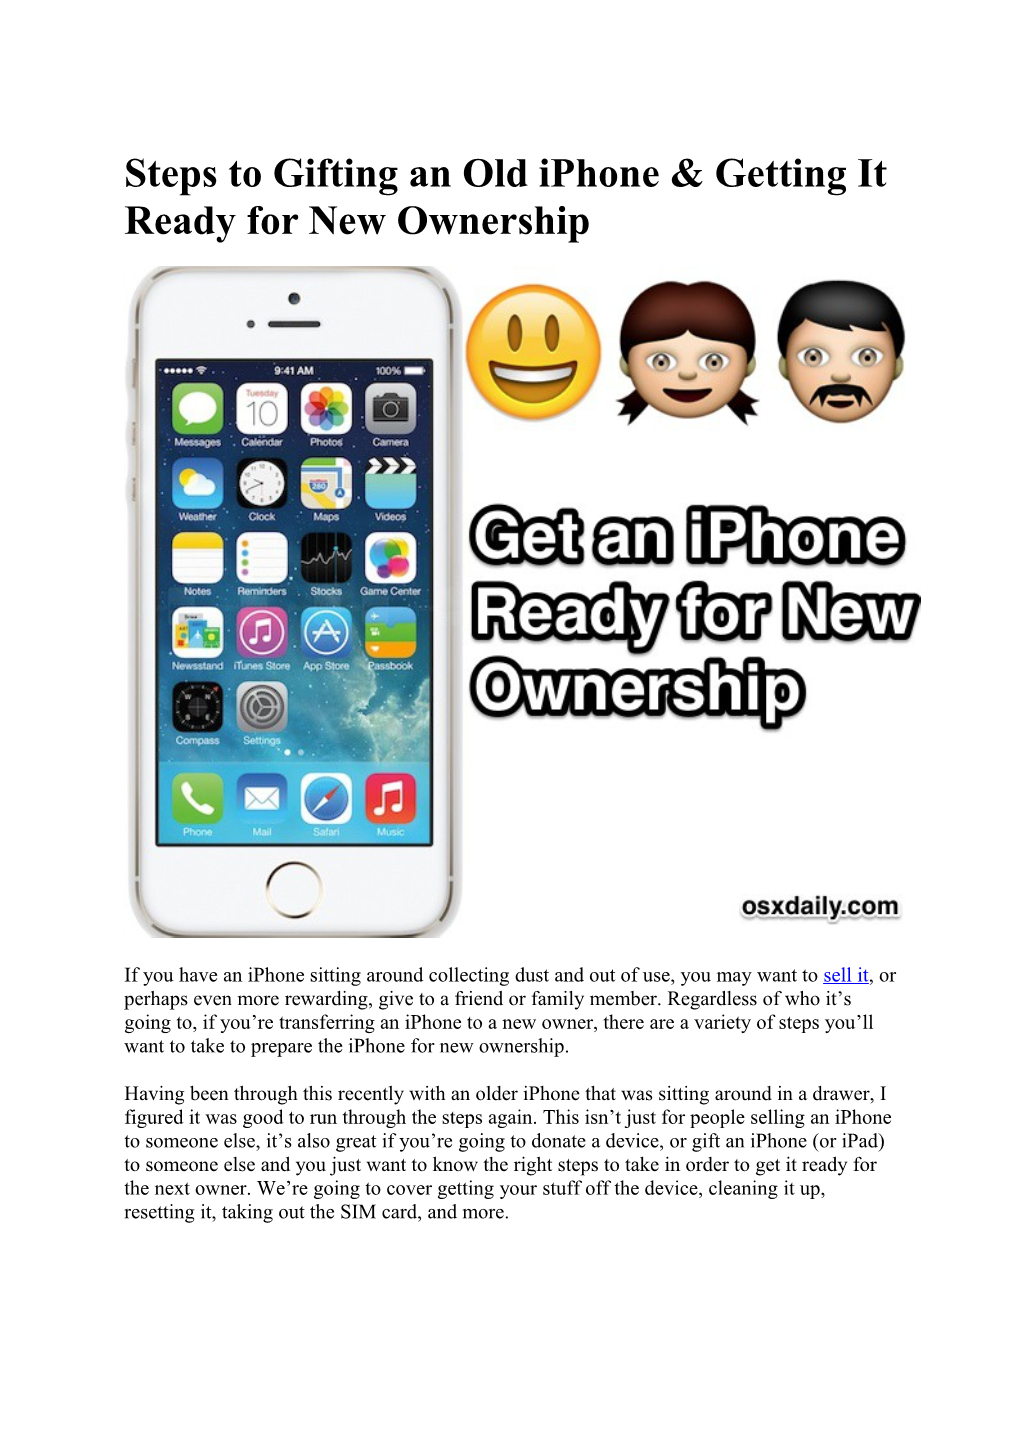 Steps to Gifting an Old Iphone & Getting It Ready for New Ownership